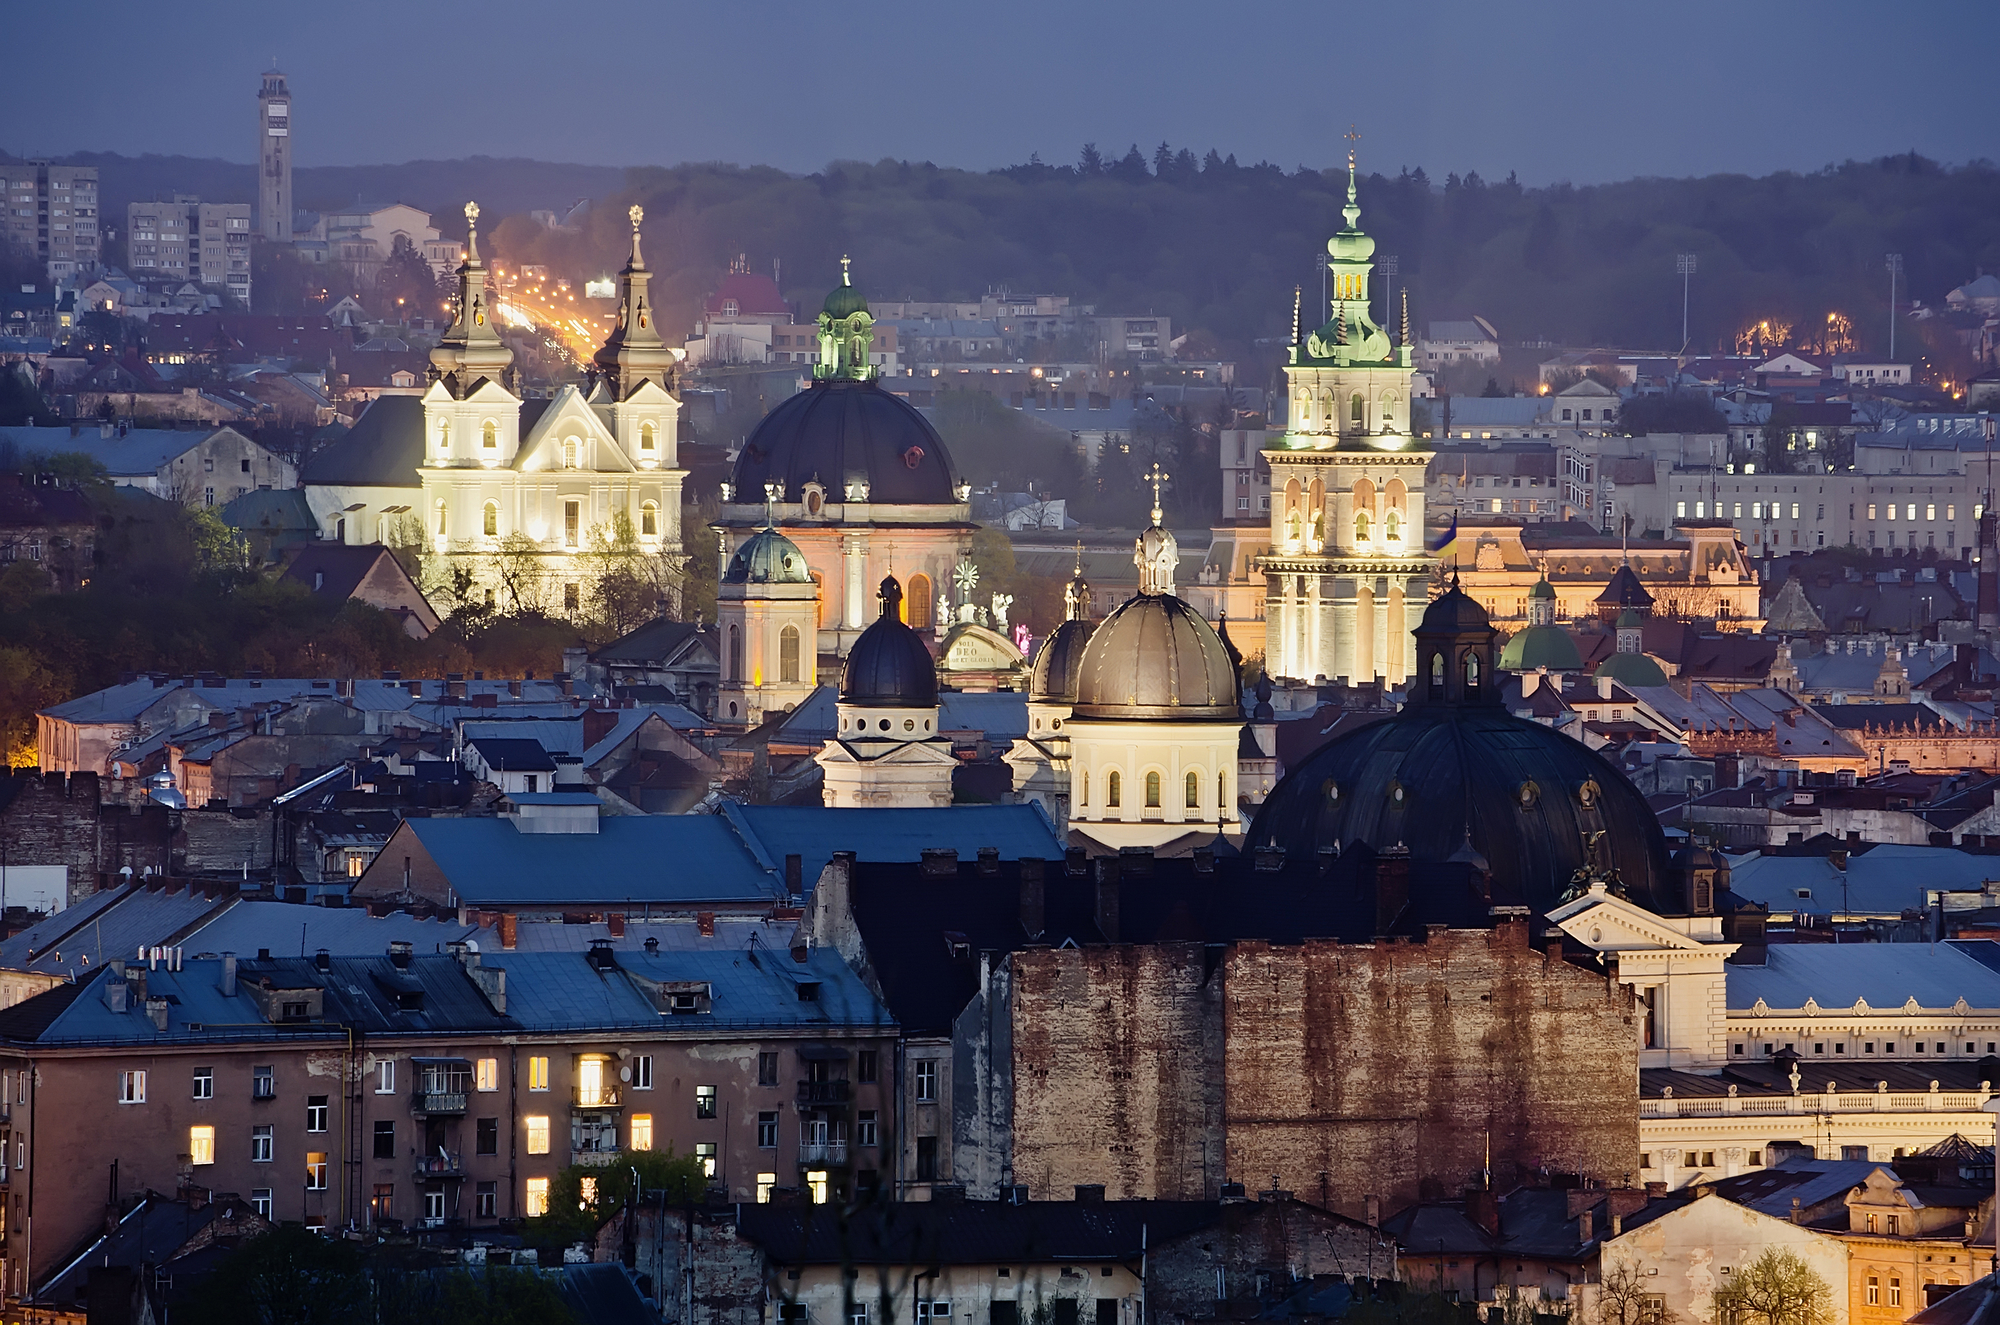 Historic center of Lvov city at night close up stock image